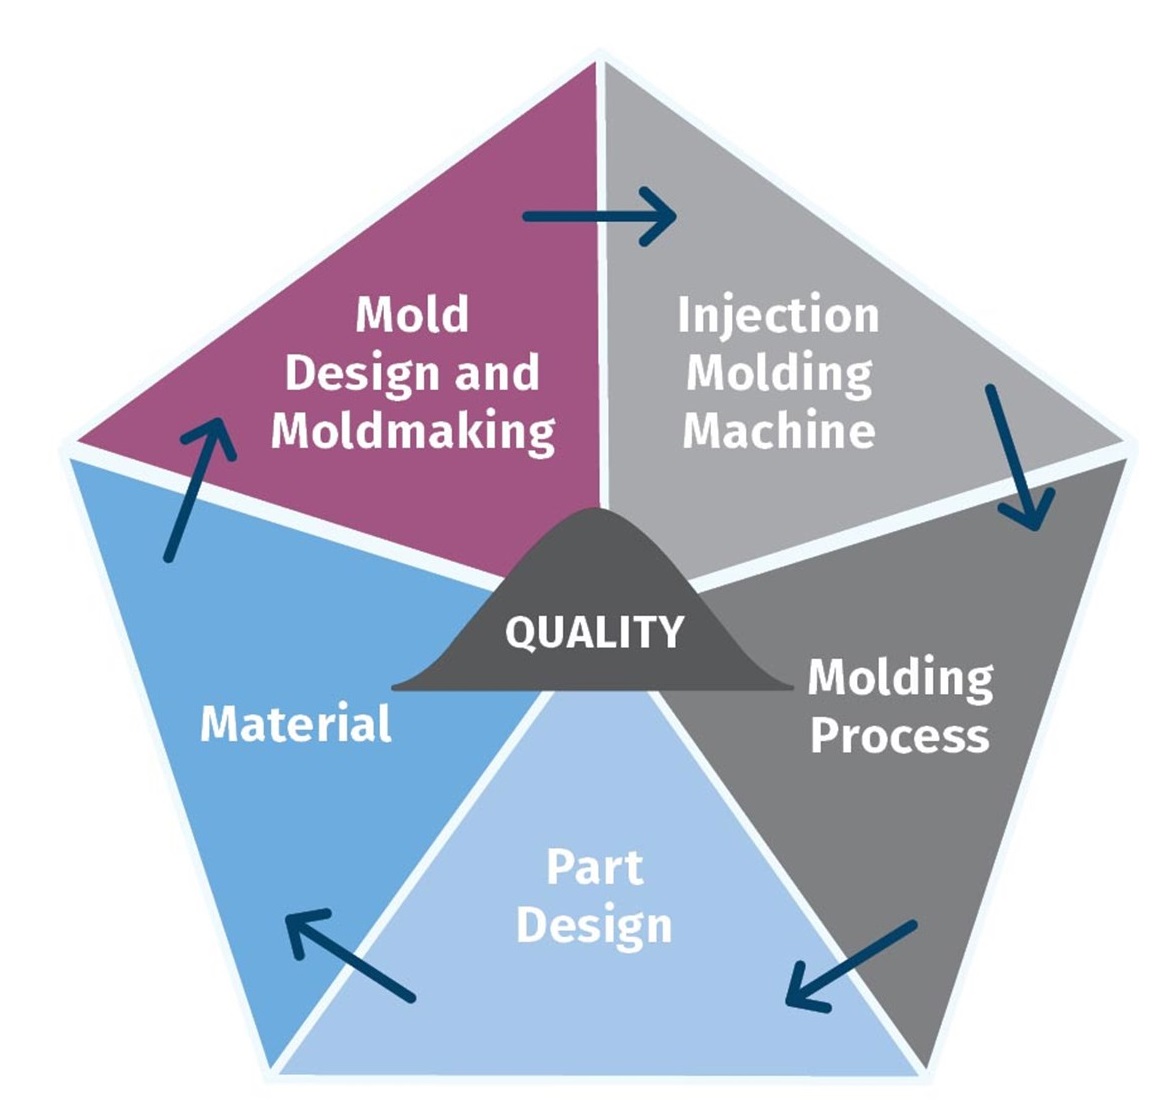 Quality in injection molding